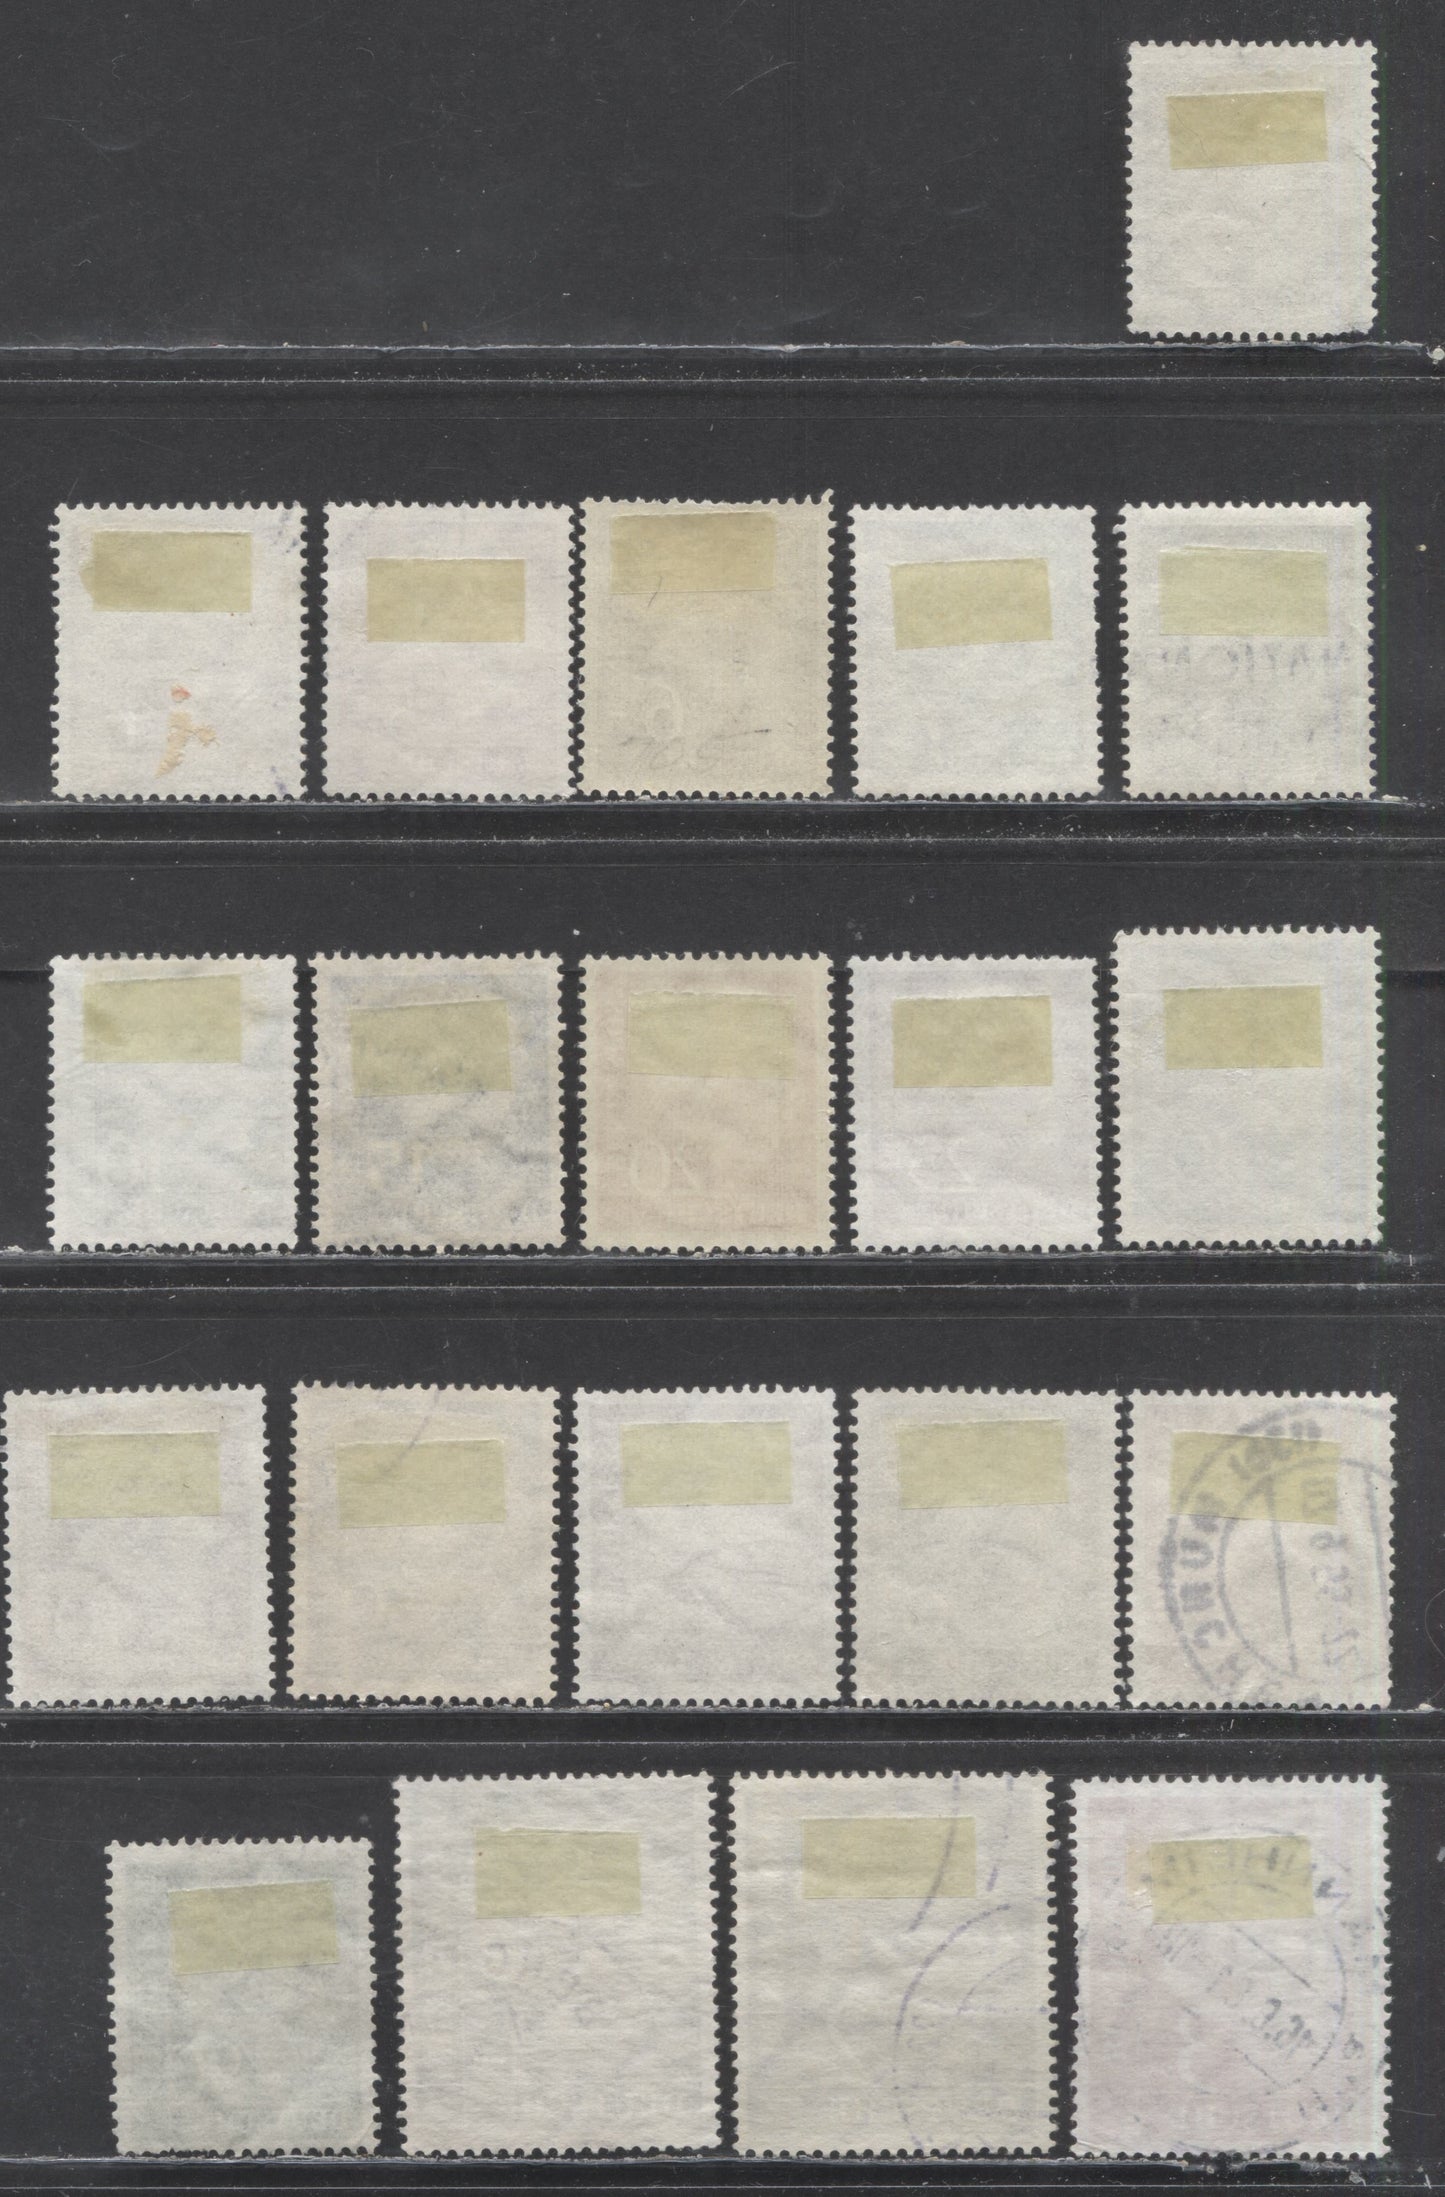 Lot 118 Germany SC#702-721 1954-1960 Heuss Definitives, 20 Fine/Very Fine Used Singles, Click on Listing to See ALL Pictures, 2017 Scott Cat. $20 USD